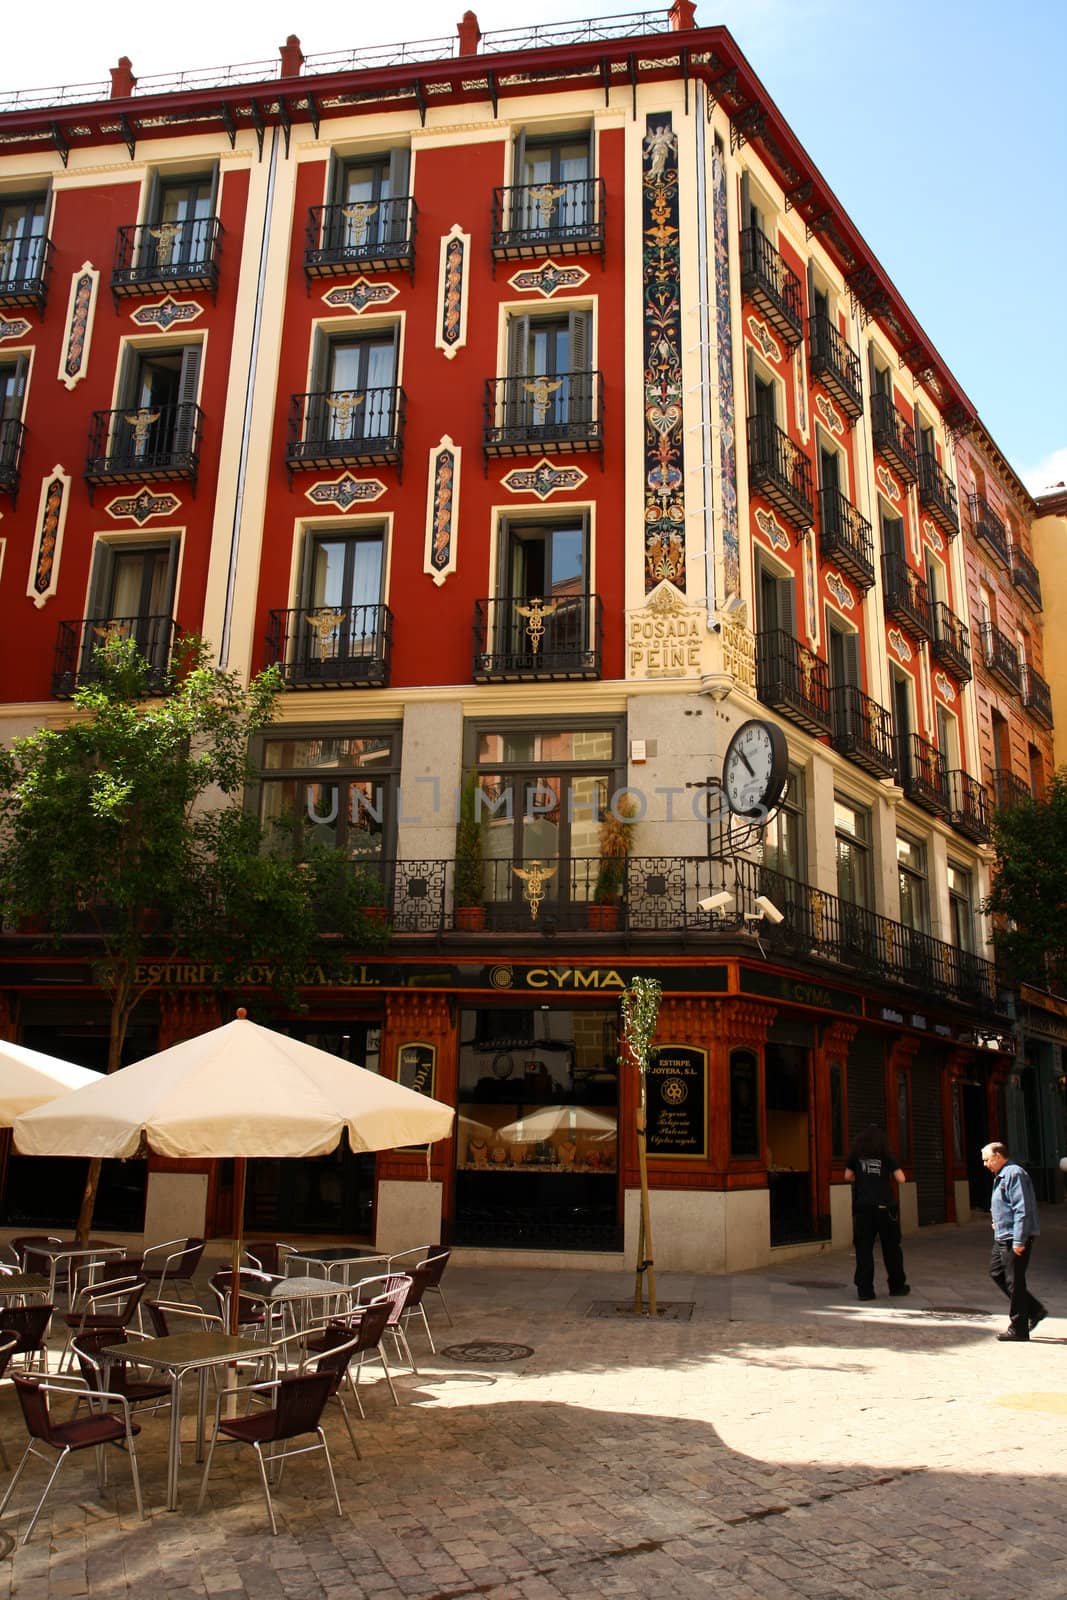 The Posada del Peine building, built 1610, near the Plaza Mayor in downtown Madrid, Spain.